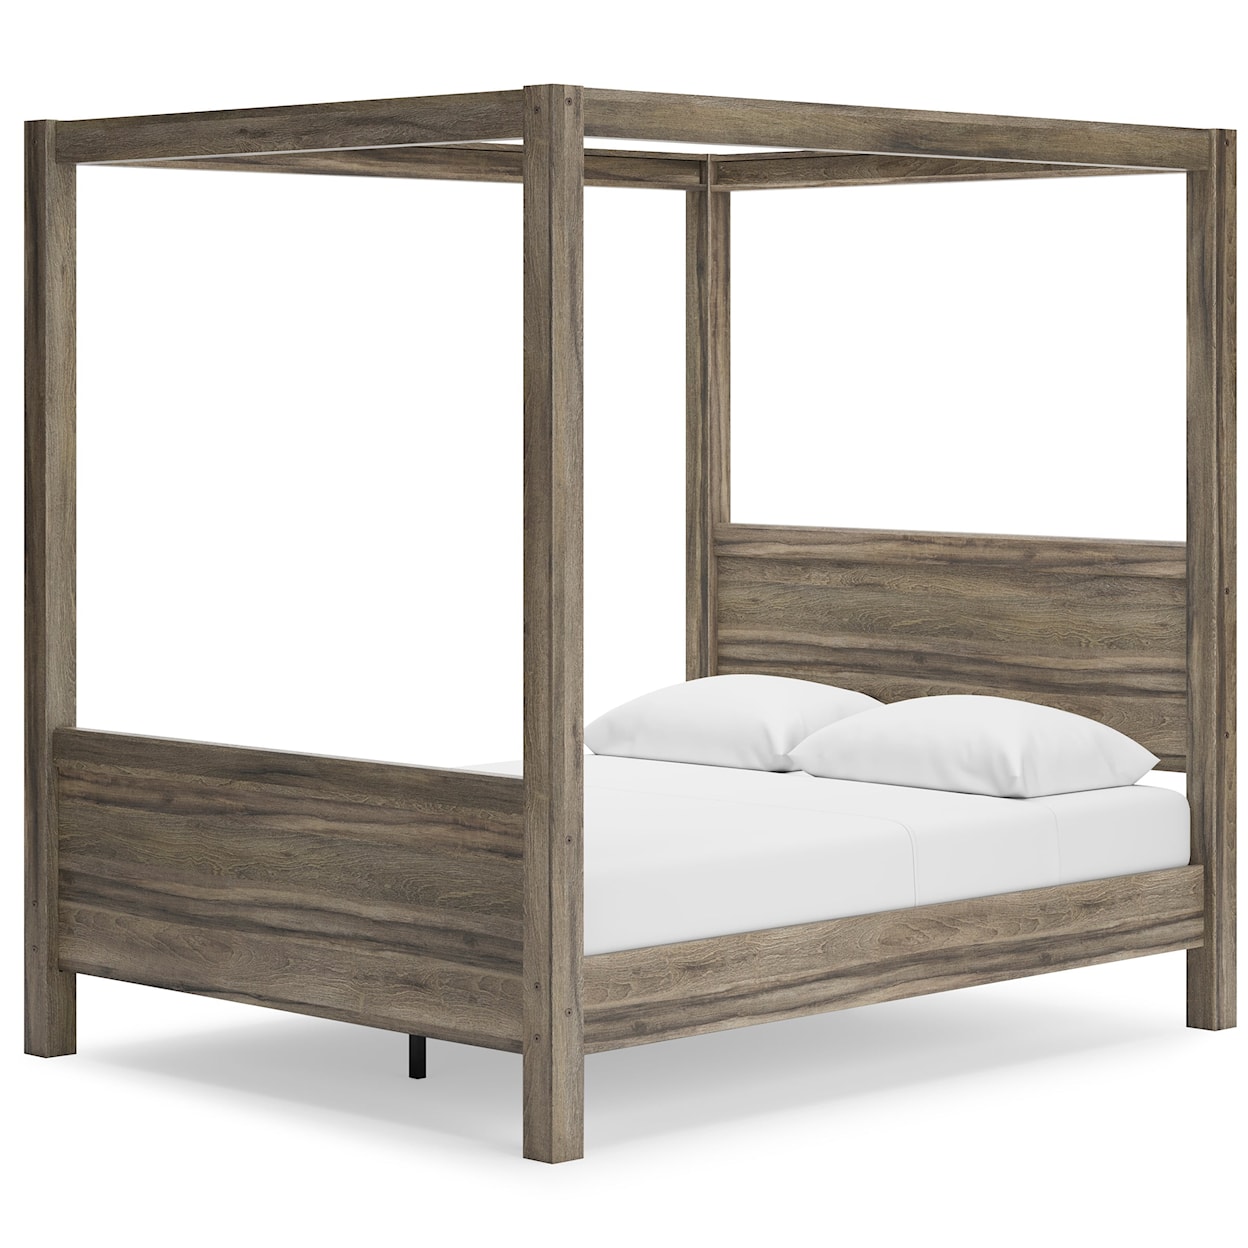 Michael Alan Select Shallifer Queen Canopy Bed